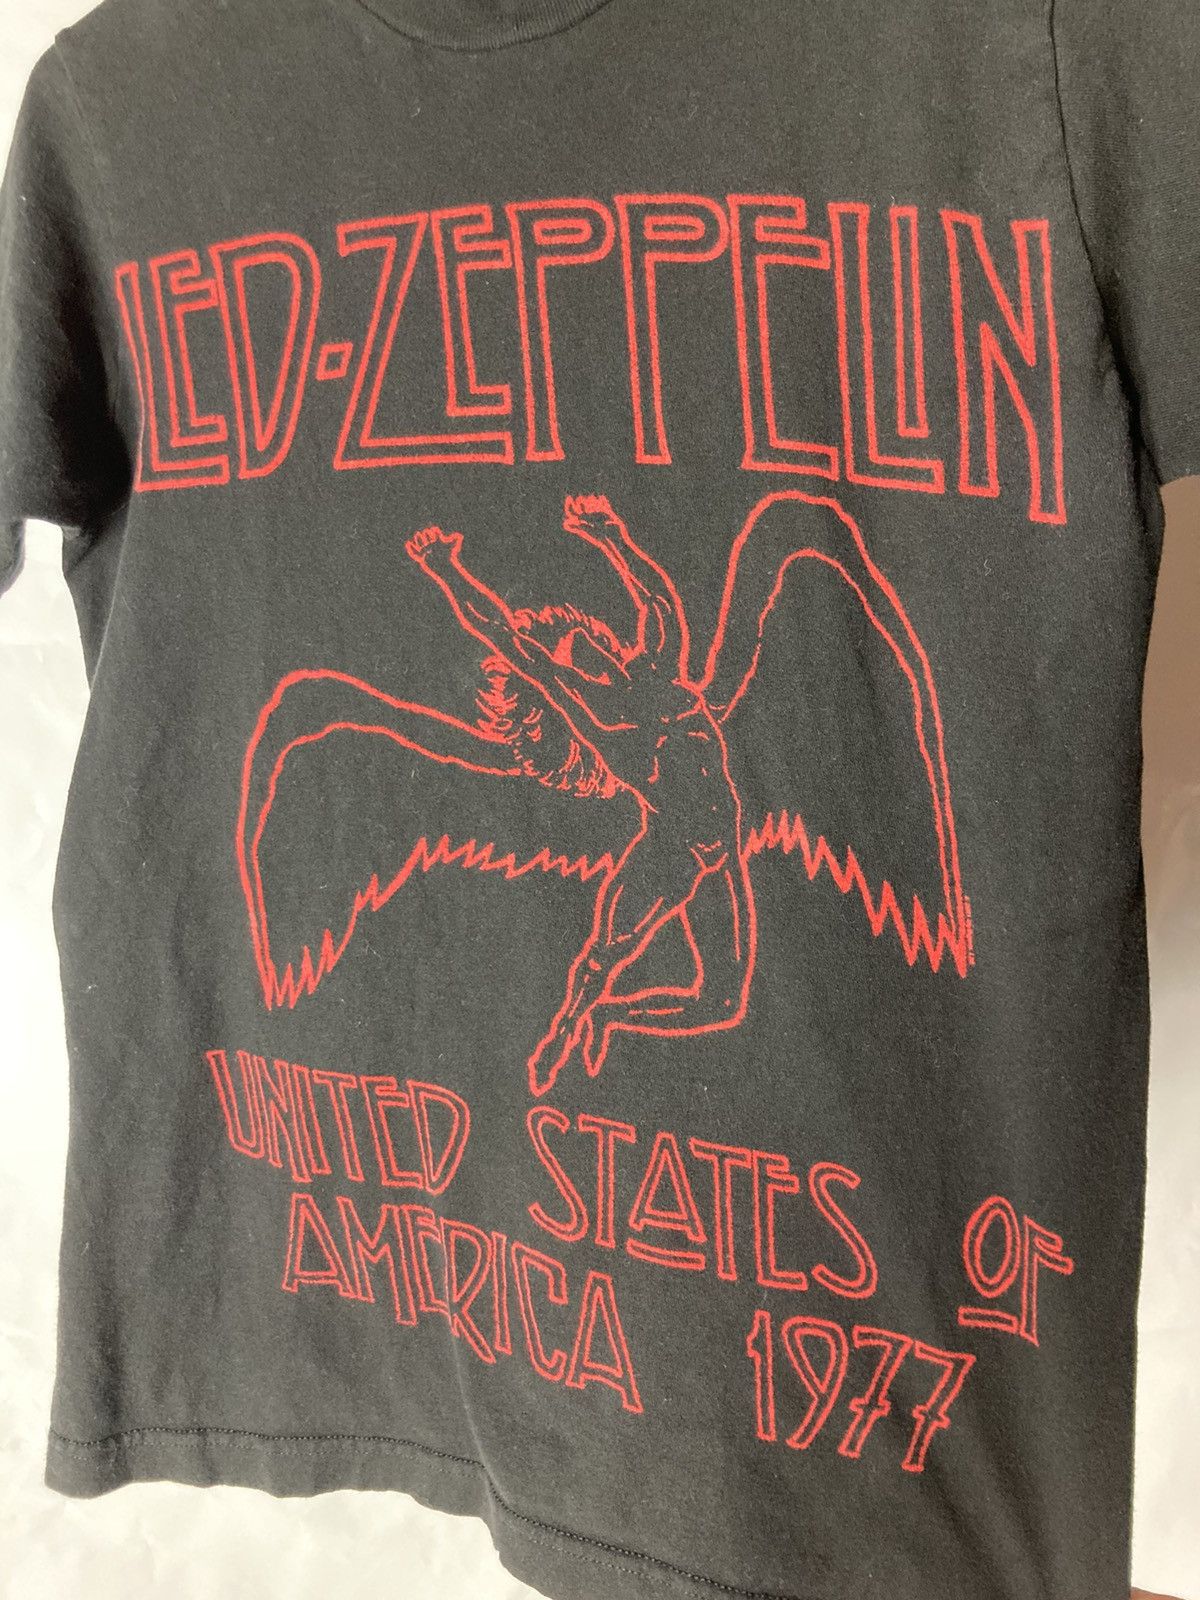 Vintage Led Zeppelin band tee shirt repro y2k size small black vtg Size US S / EU 44-46 / 1 - 2 Preview